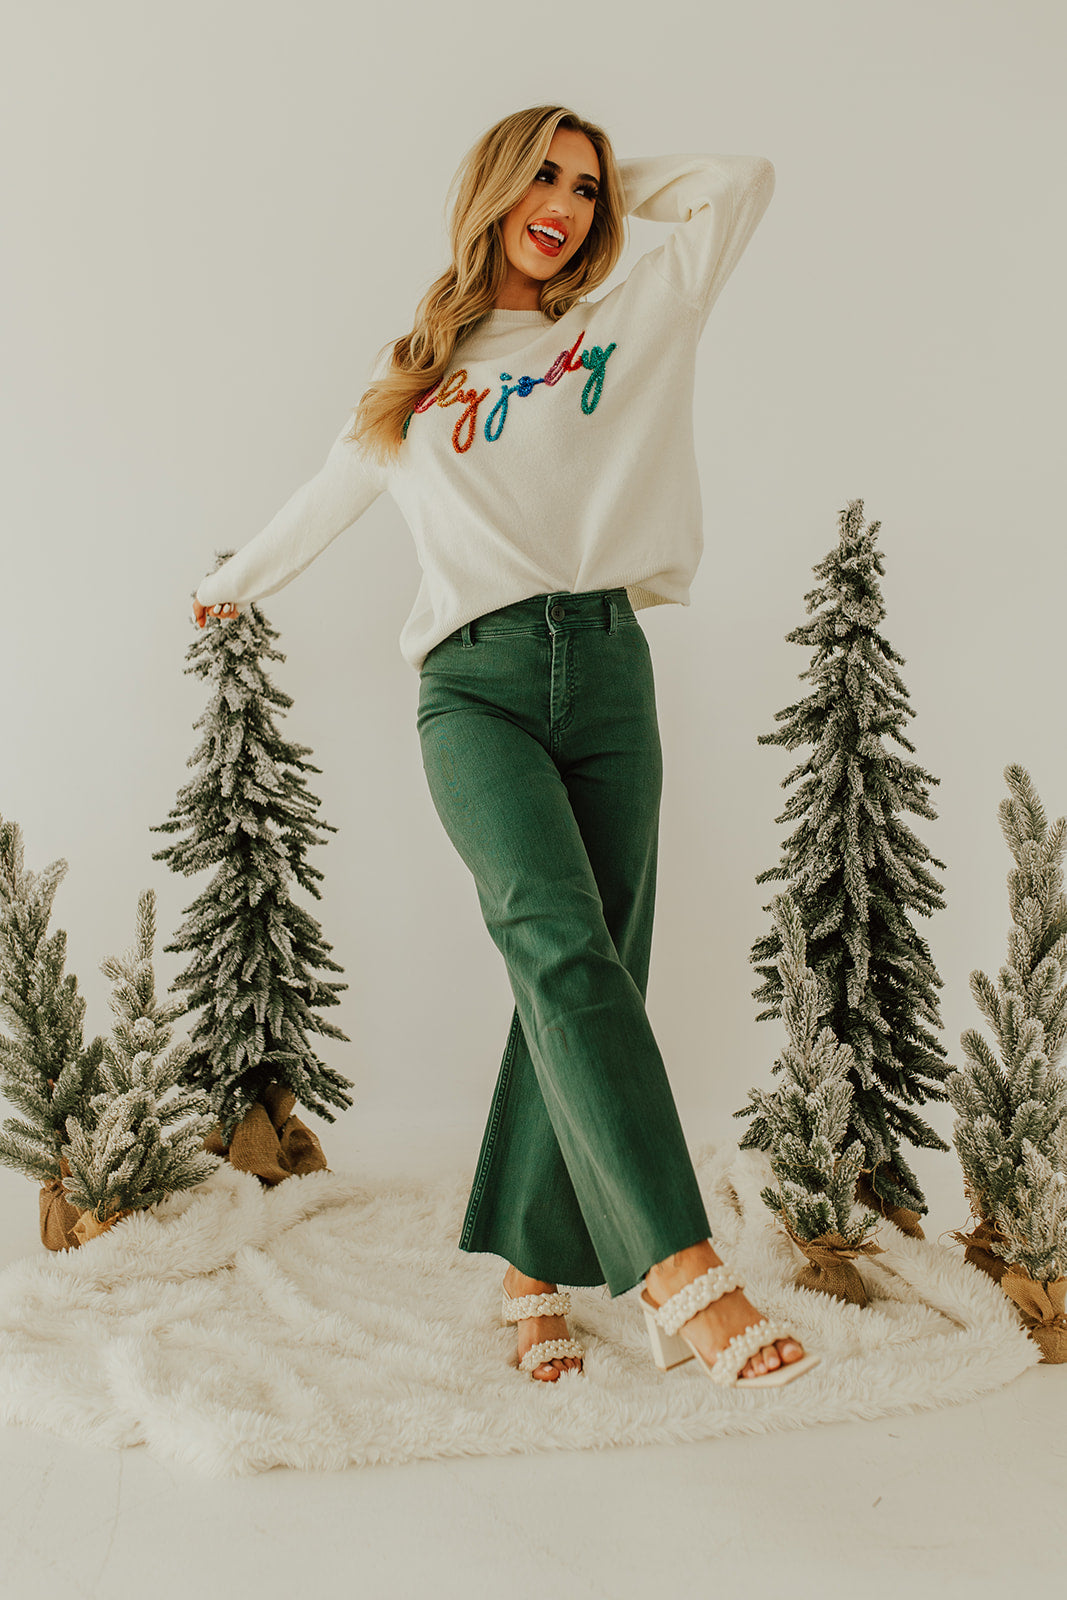 THE HOLLY JOLLY TINSEL SWEATER IN IVORY